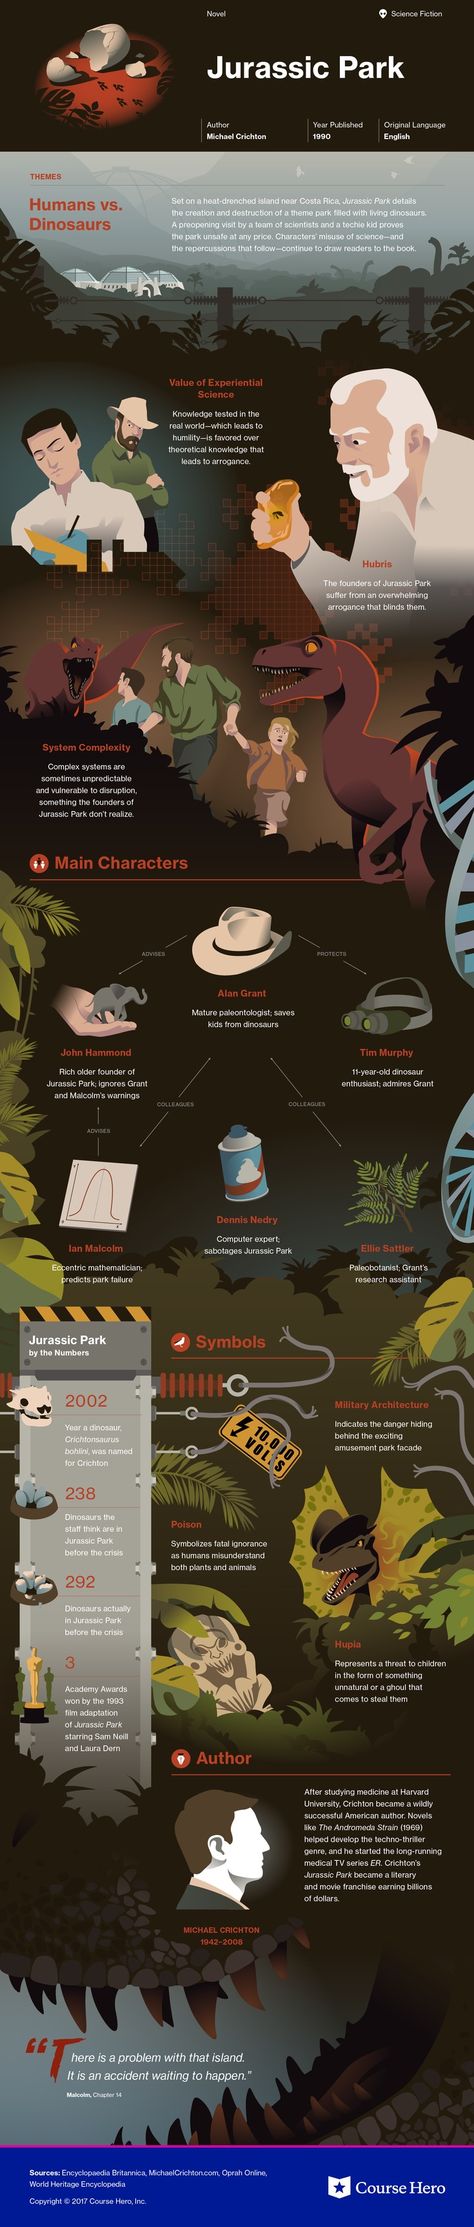 This @CourseHero infographic on Jurassic Park is both visually stunning and informative! Book Infographic, Jurassic Park Series, Jurassic Park Film, Jurrasic Park, Literary Devices, Michael Crichton, Jurassic World Dinosaurs, Falling Kingdoms, Jurassic Park World